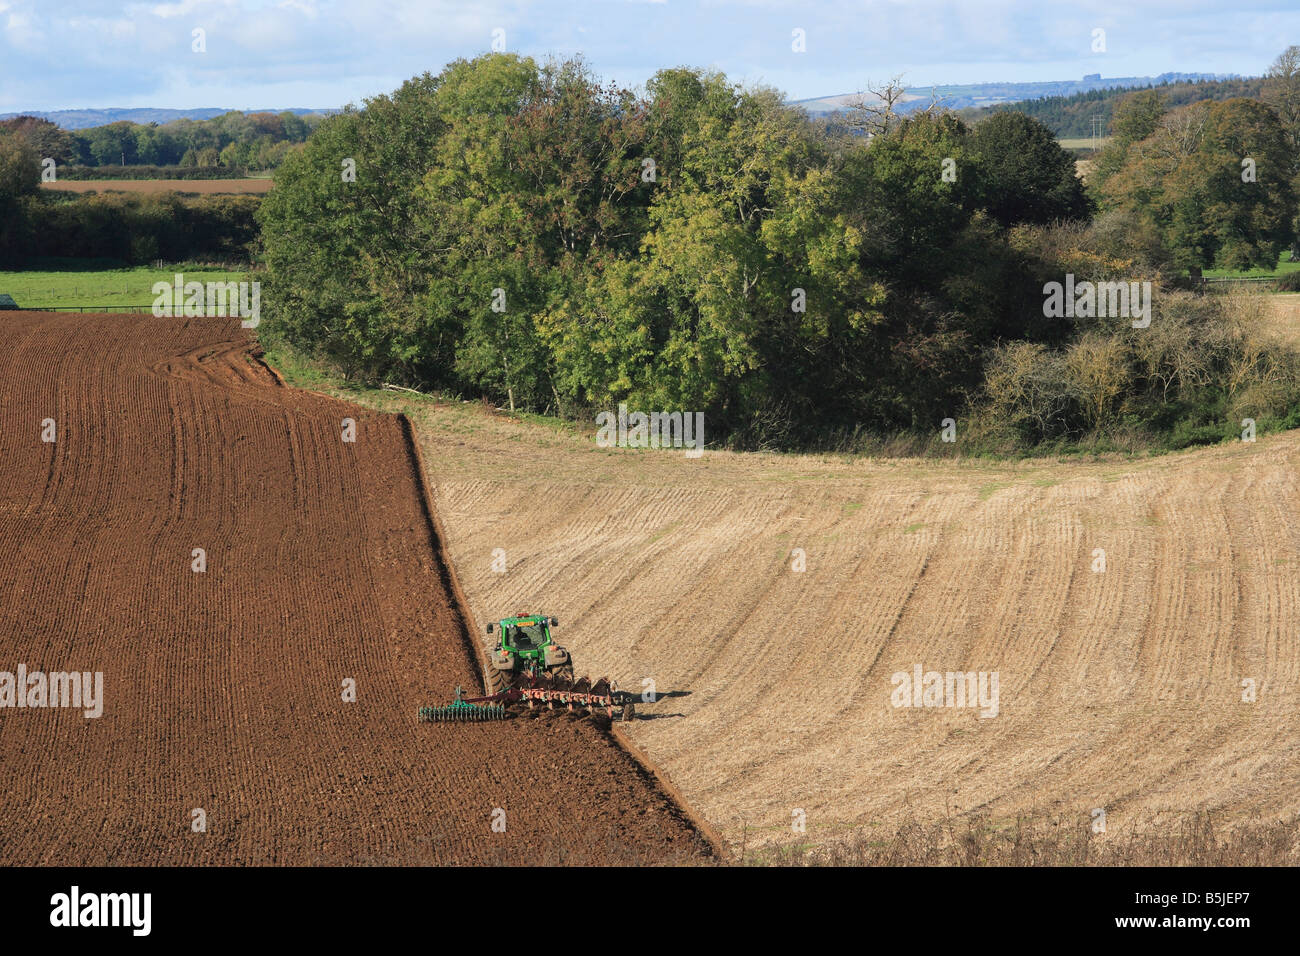 Farmer in Tractor Ploughing a field Stock Photo